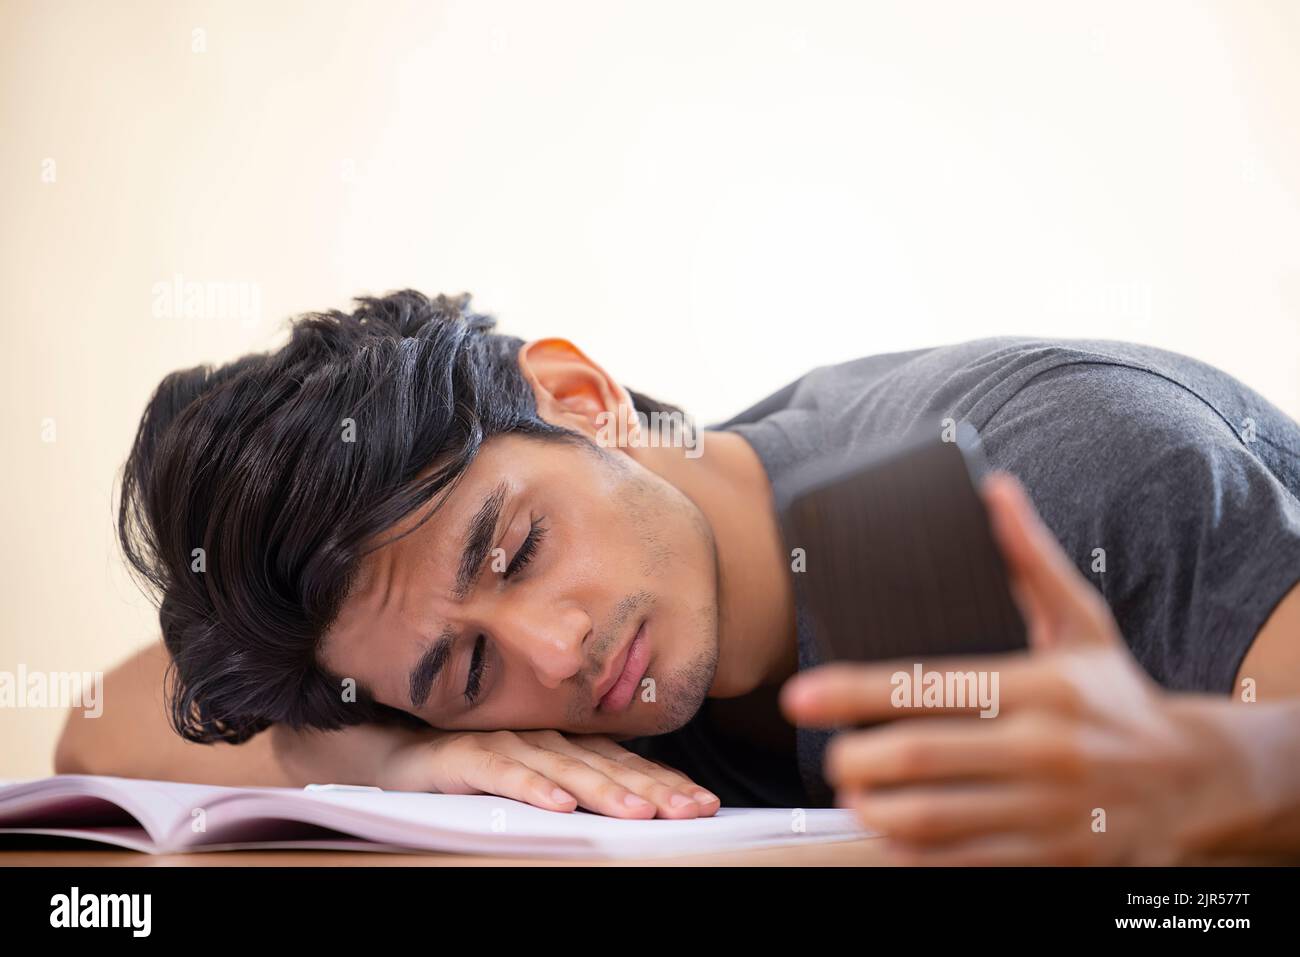 Close-up portrait of a tired teenager sleeping with holding a smartphone Stock Photo